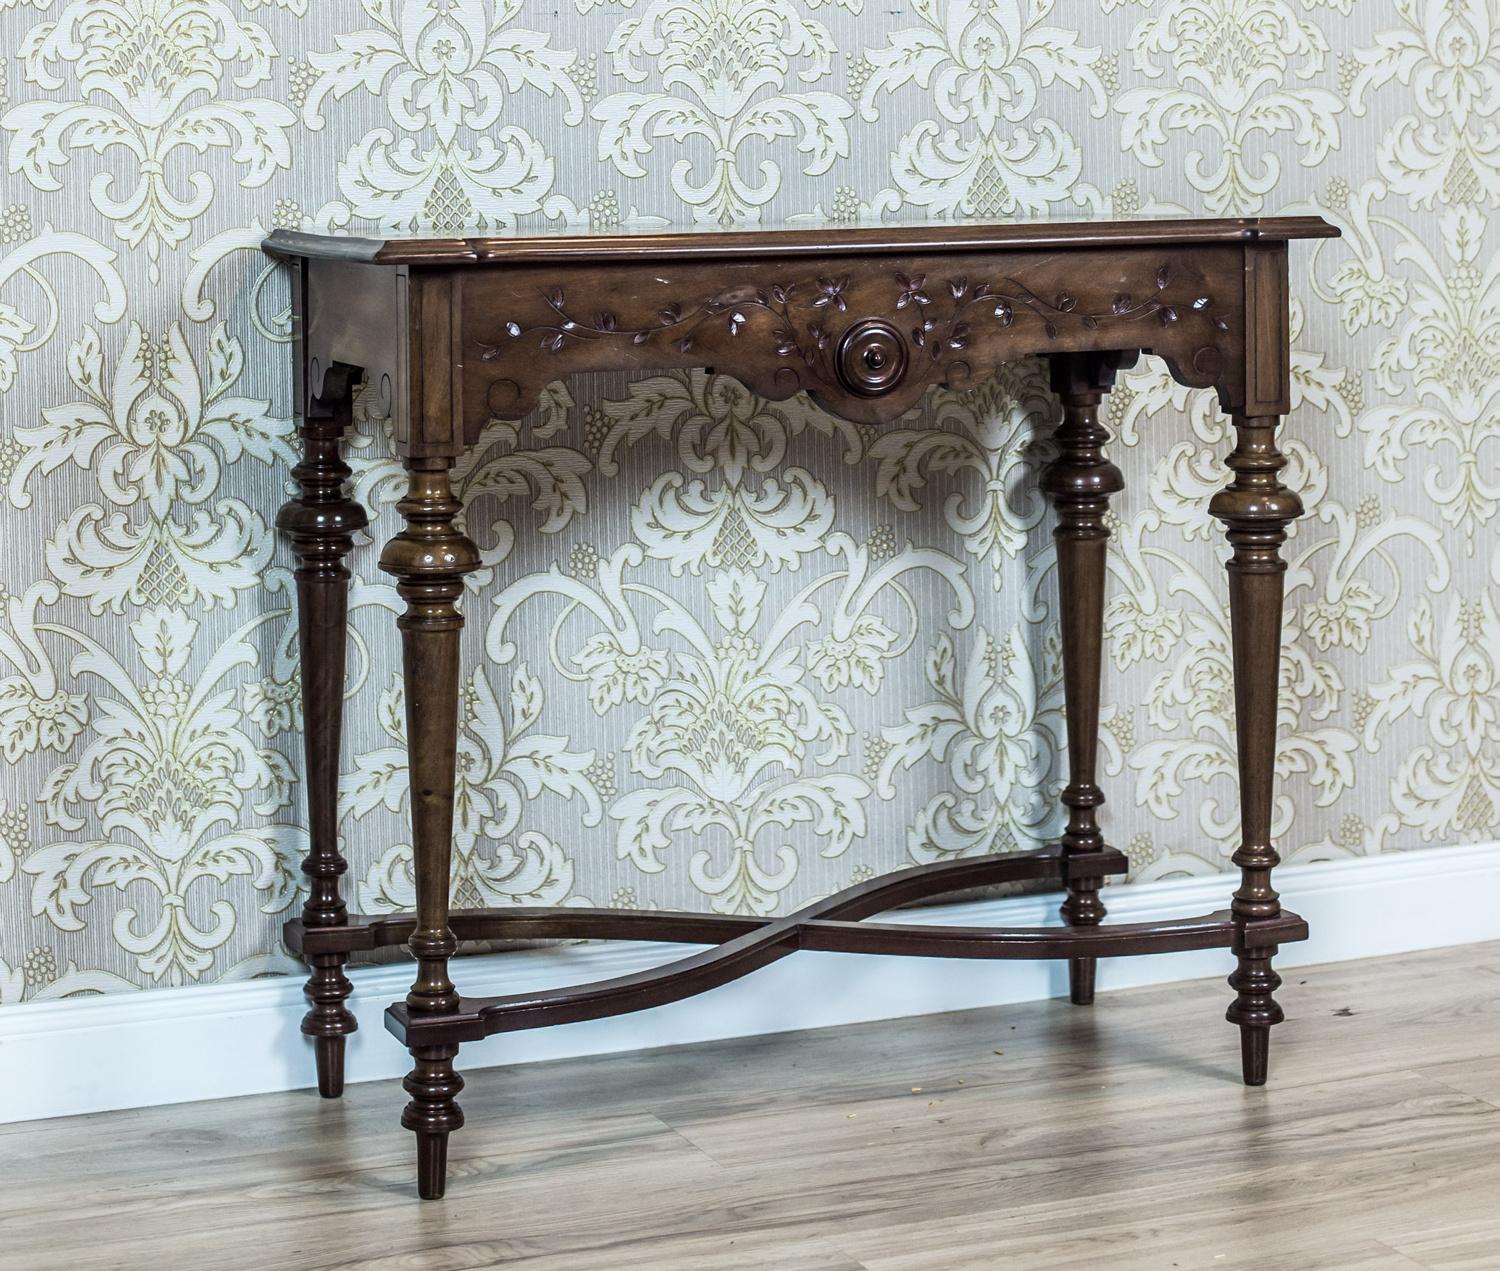 We present you this narrow wall table in the console type, circa Q3 of the 19th century.
The table is placed on turned legs, which are connected with stretchers in the form of an hourglass.
The line of the apron is wavy. From the front, it is